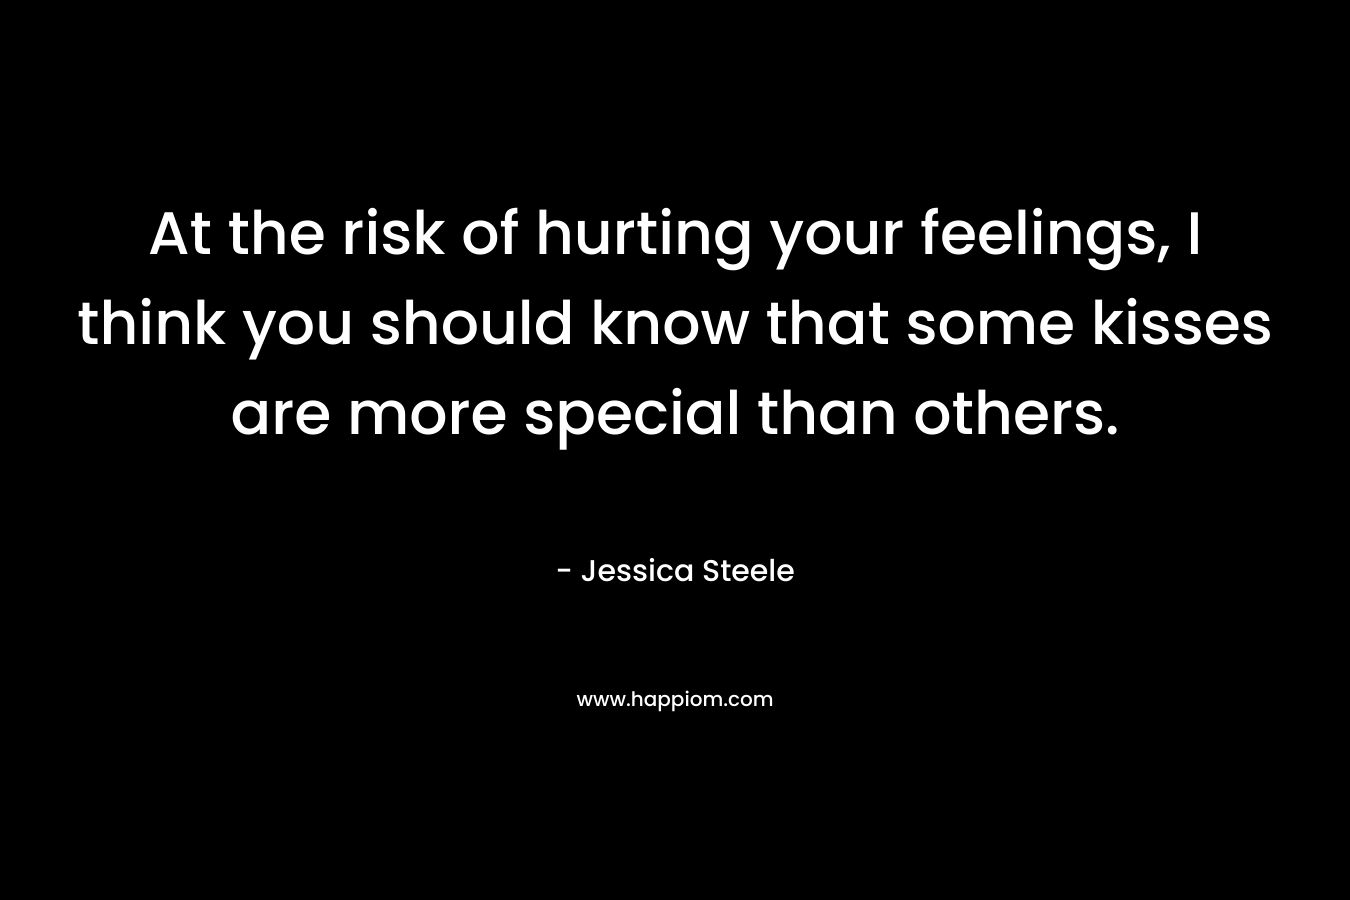 At the risk of hurting your feelings, I think you should know that some kisses are more special than others.